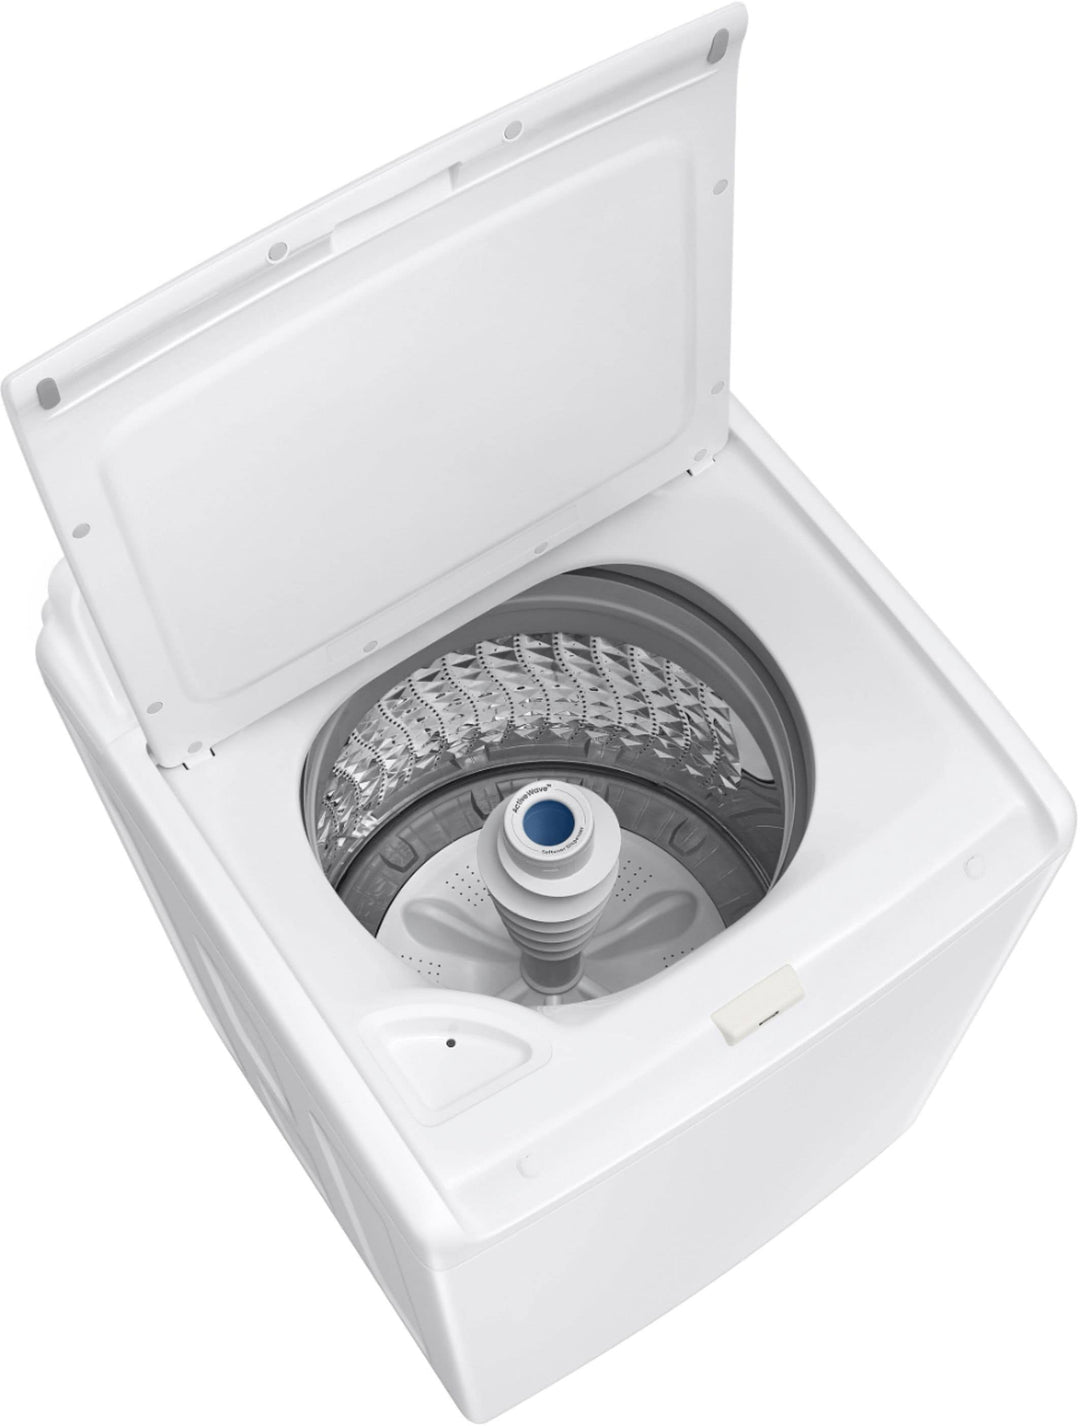 Samsung - 4.0 cu. ft. High-Efficiency Top Load Washer with ActiveWave Agitator and Soft-Close Lid - White_11